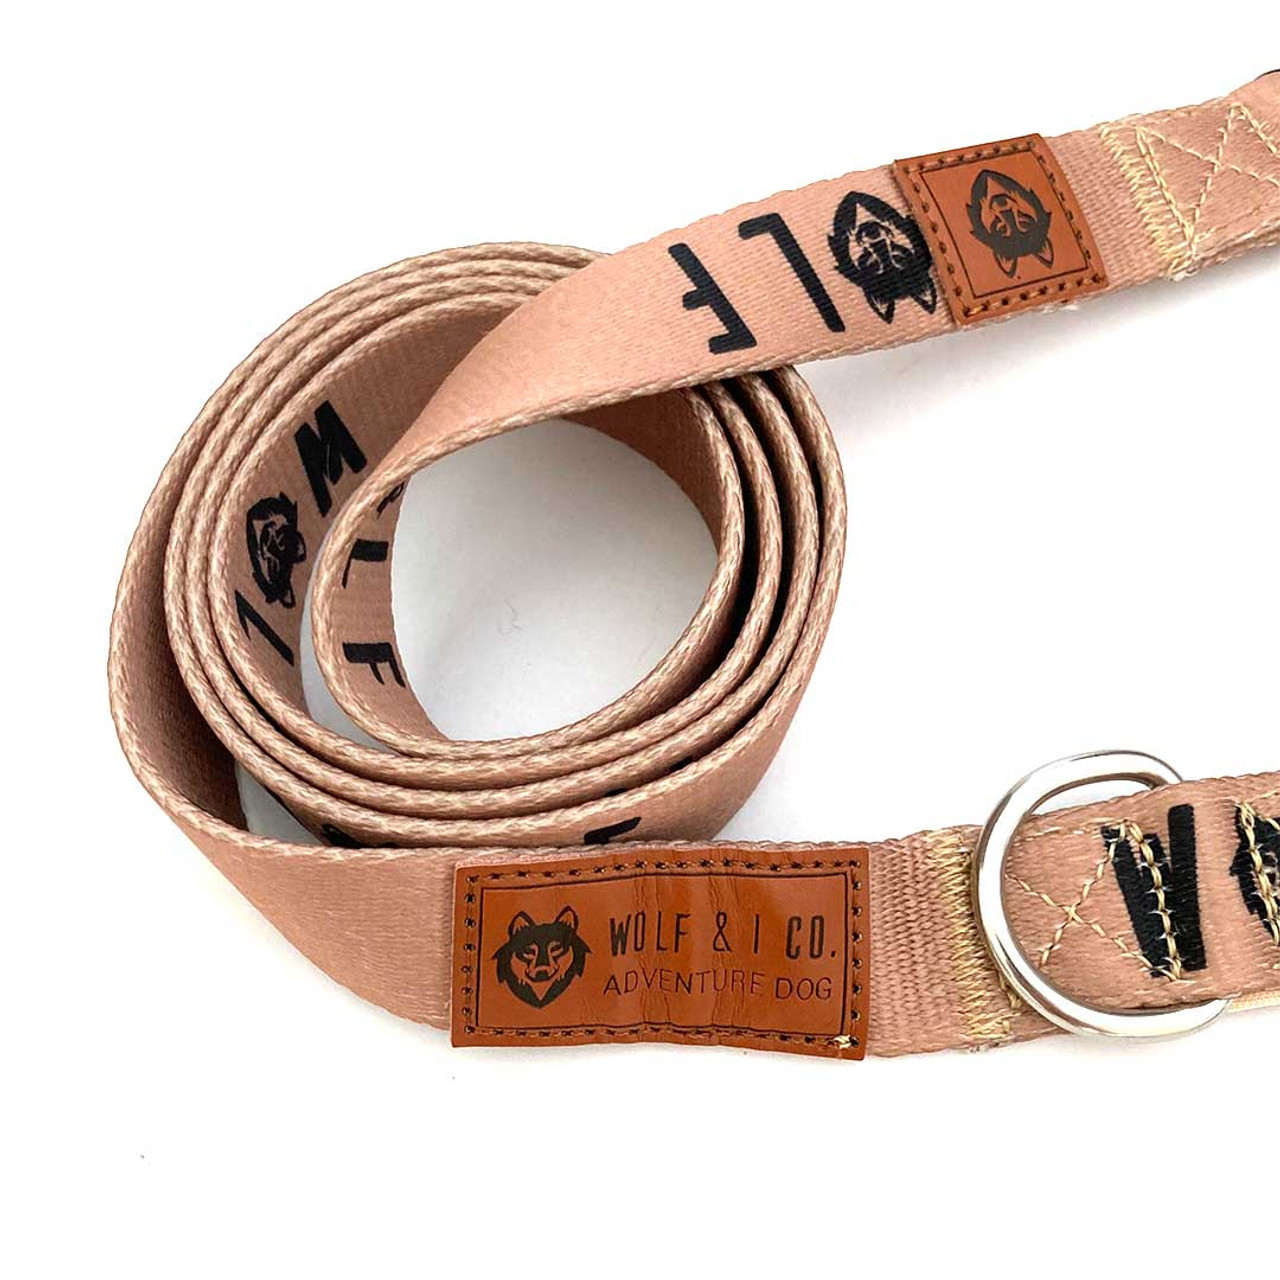 Shop Wolf & I Co. Dog Leashes | Free Shipping Orders $100+